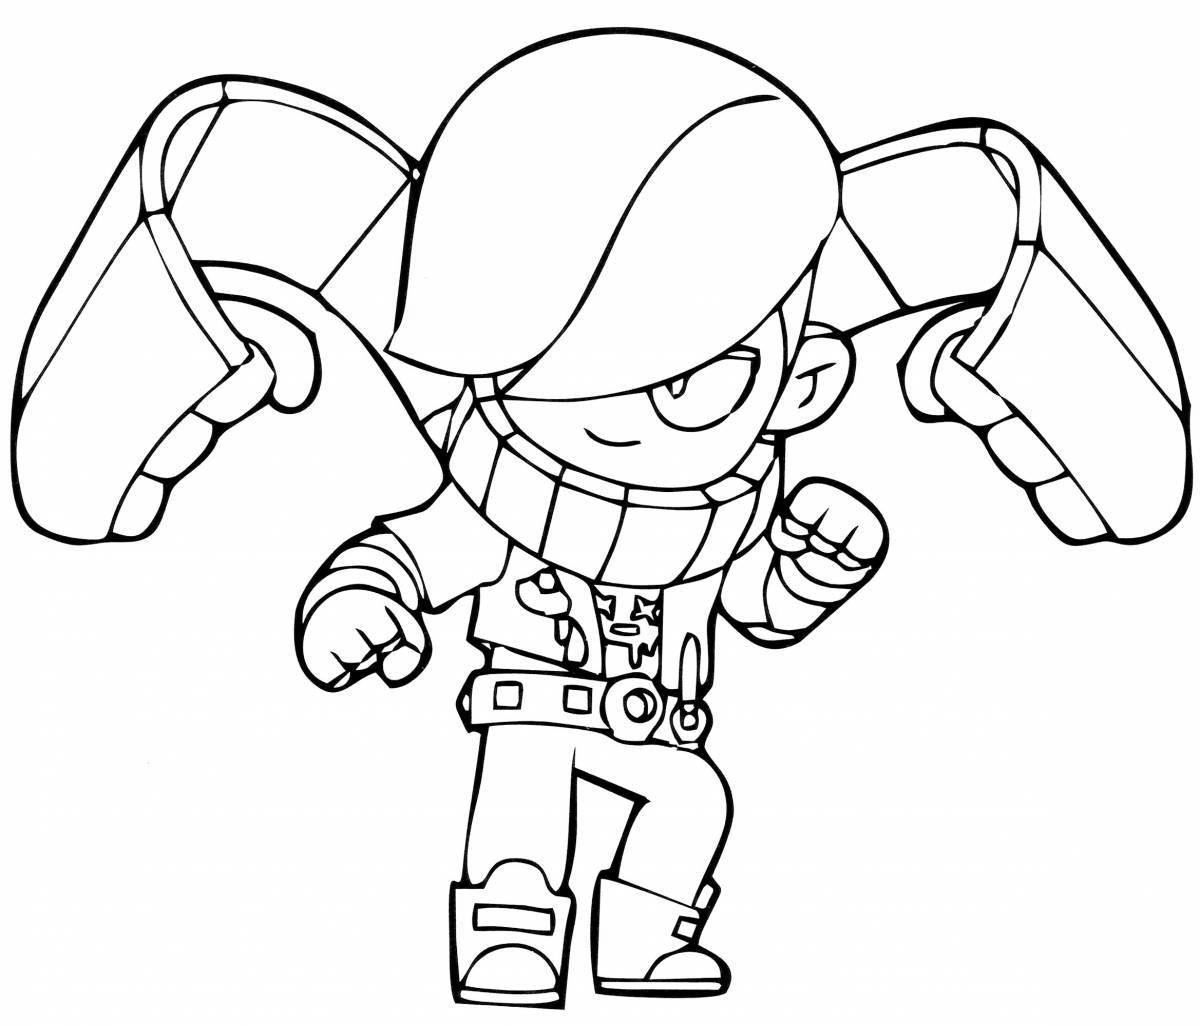 Fun sam from brawl stars coloring page